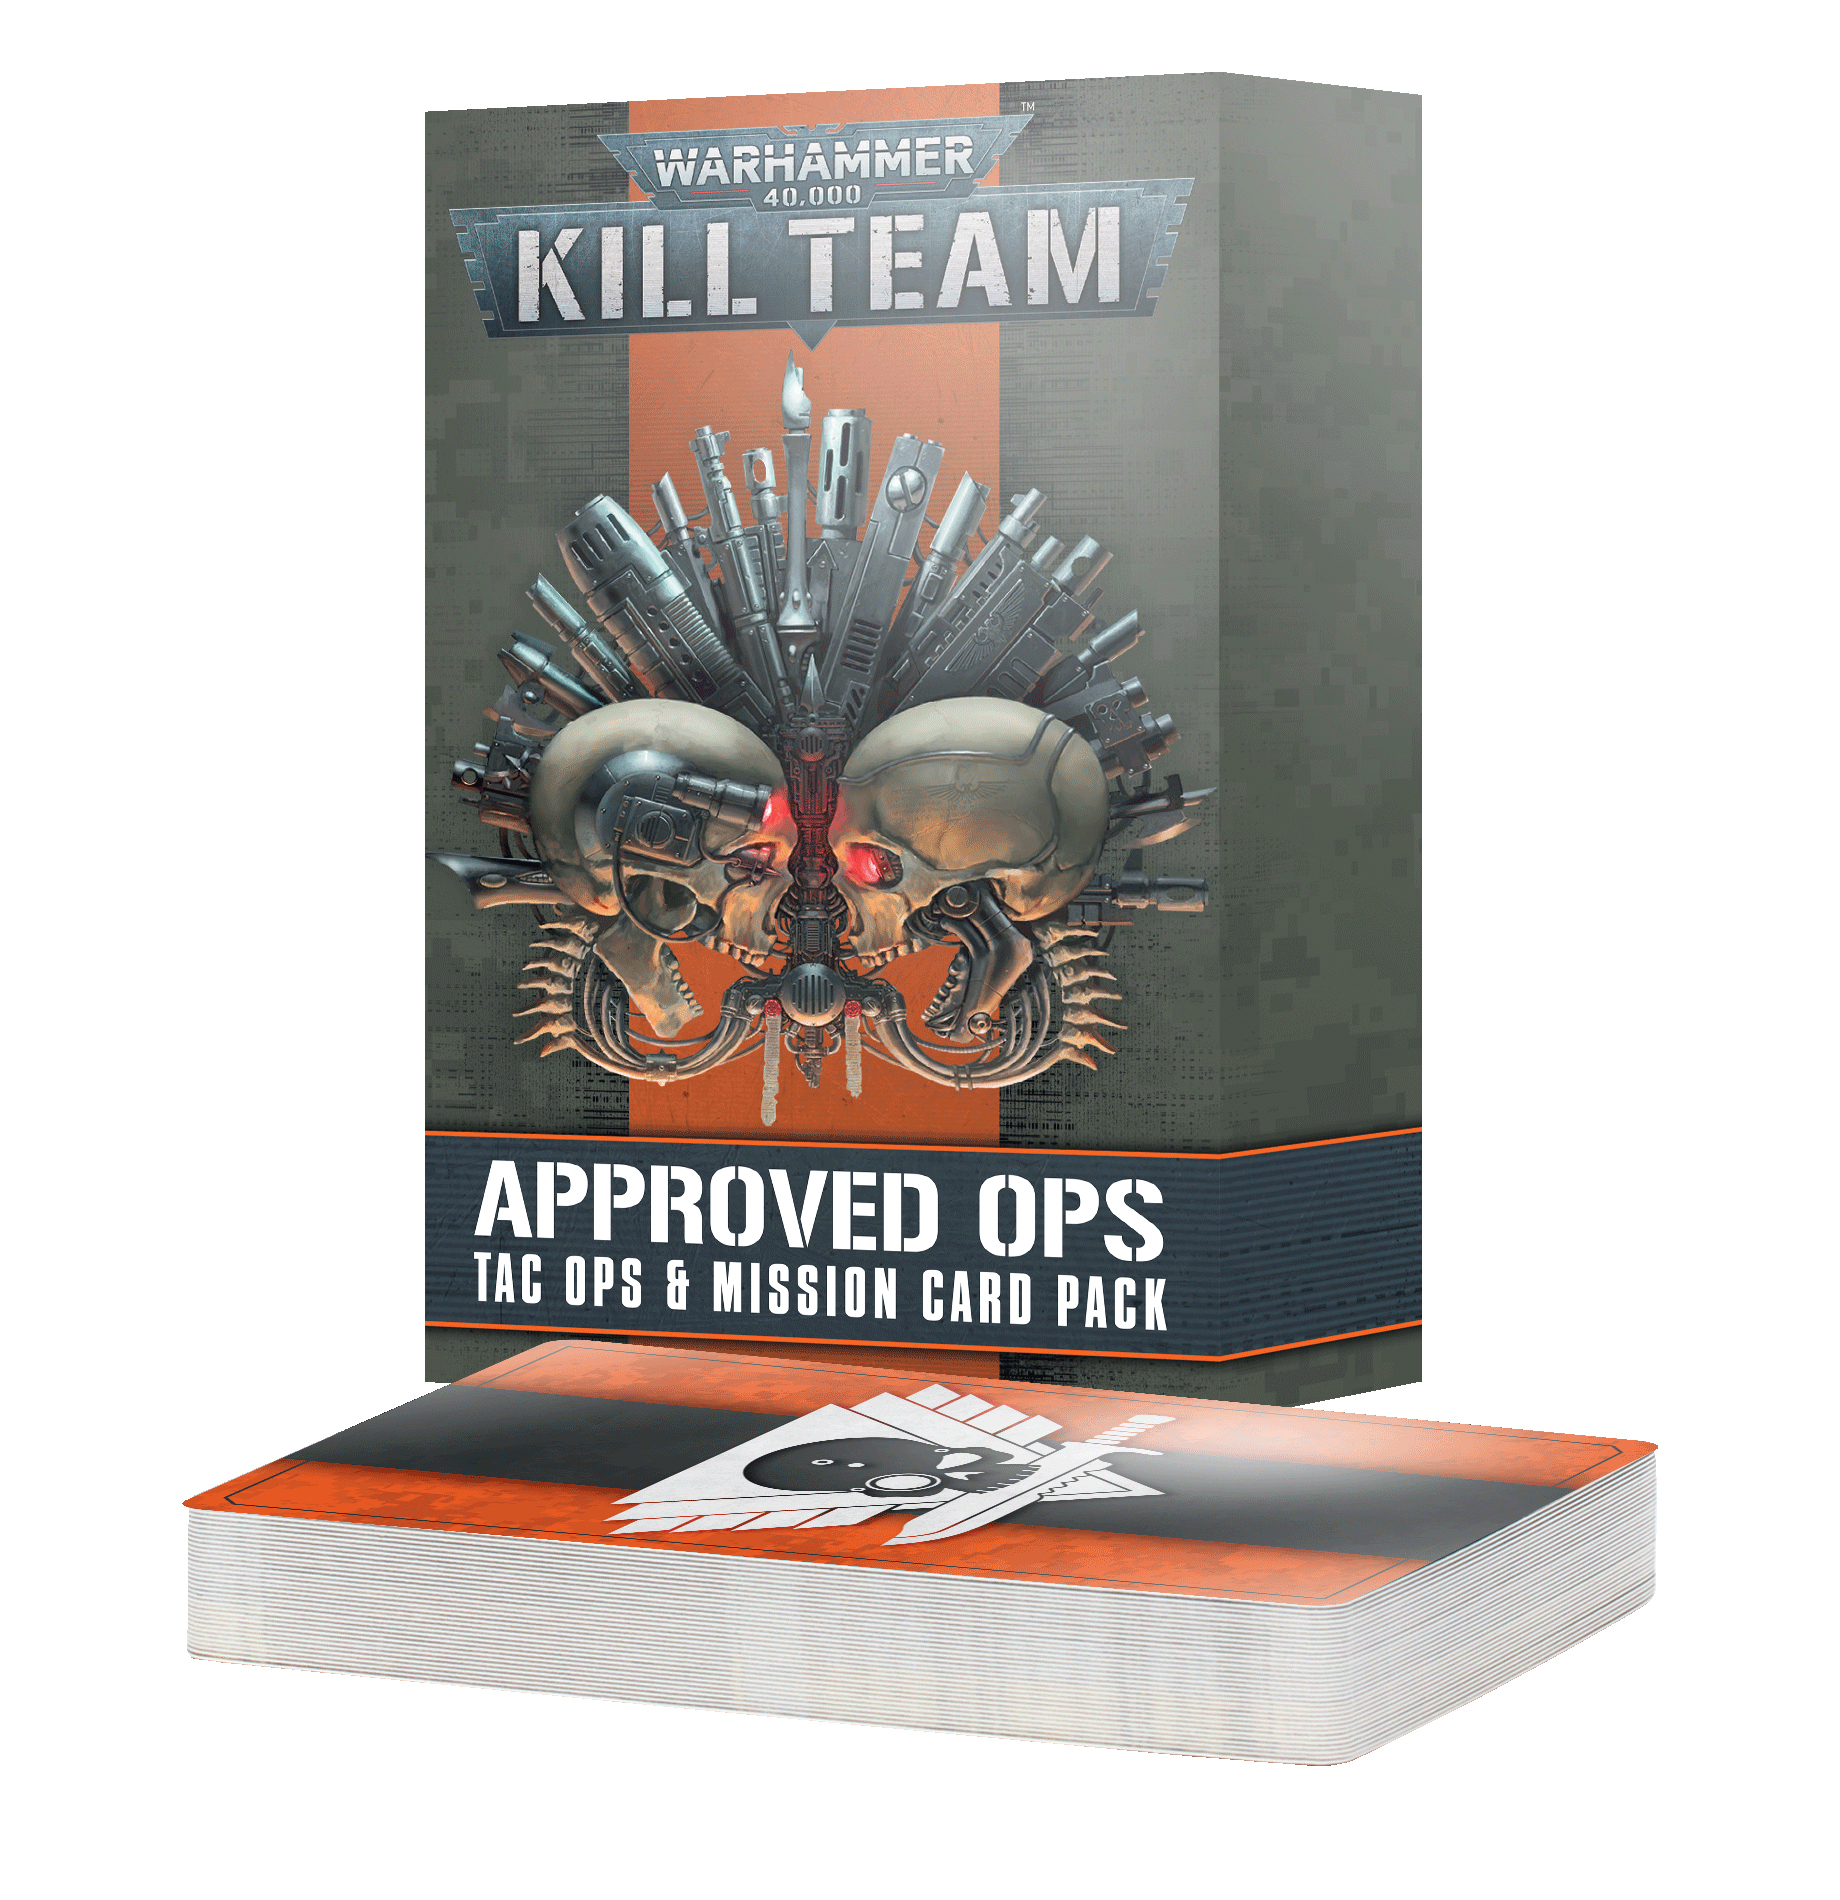 Warhammer 40,000: Kill Team: Approved Ops Tac Ops & Mission Card Pack 